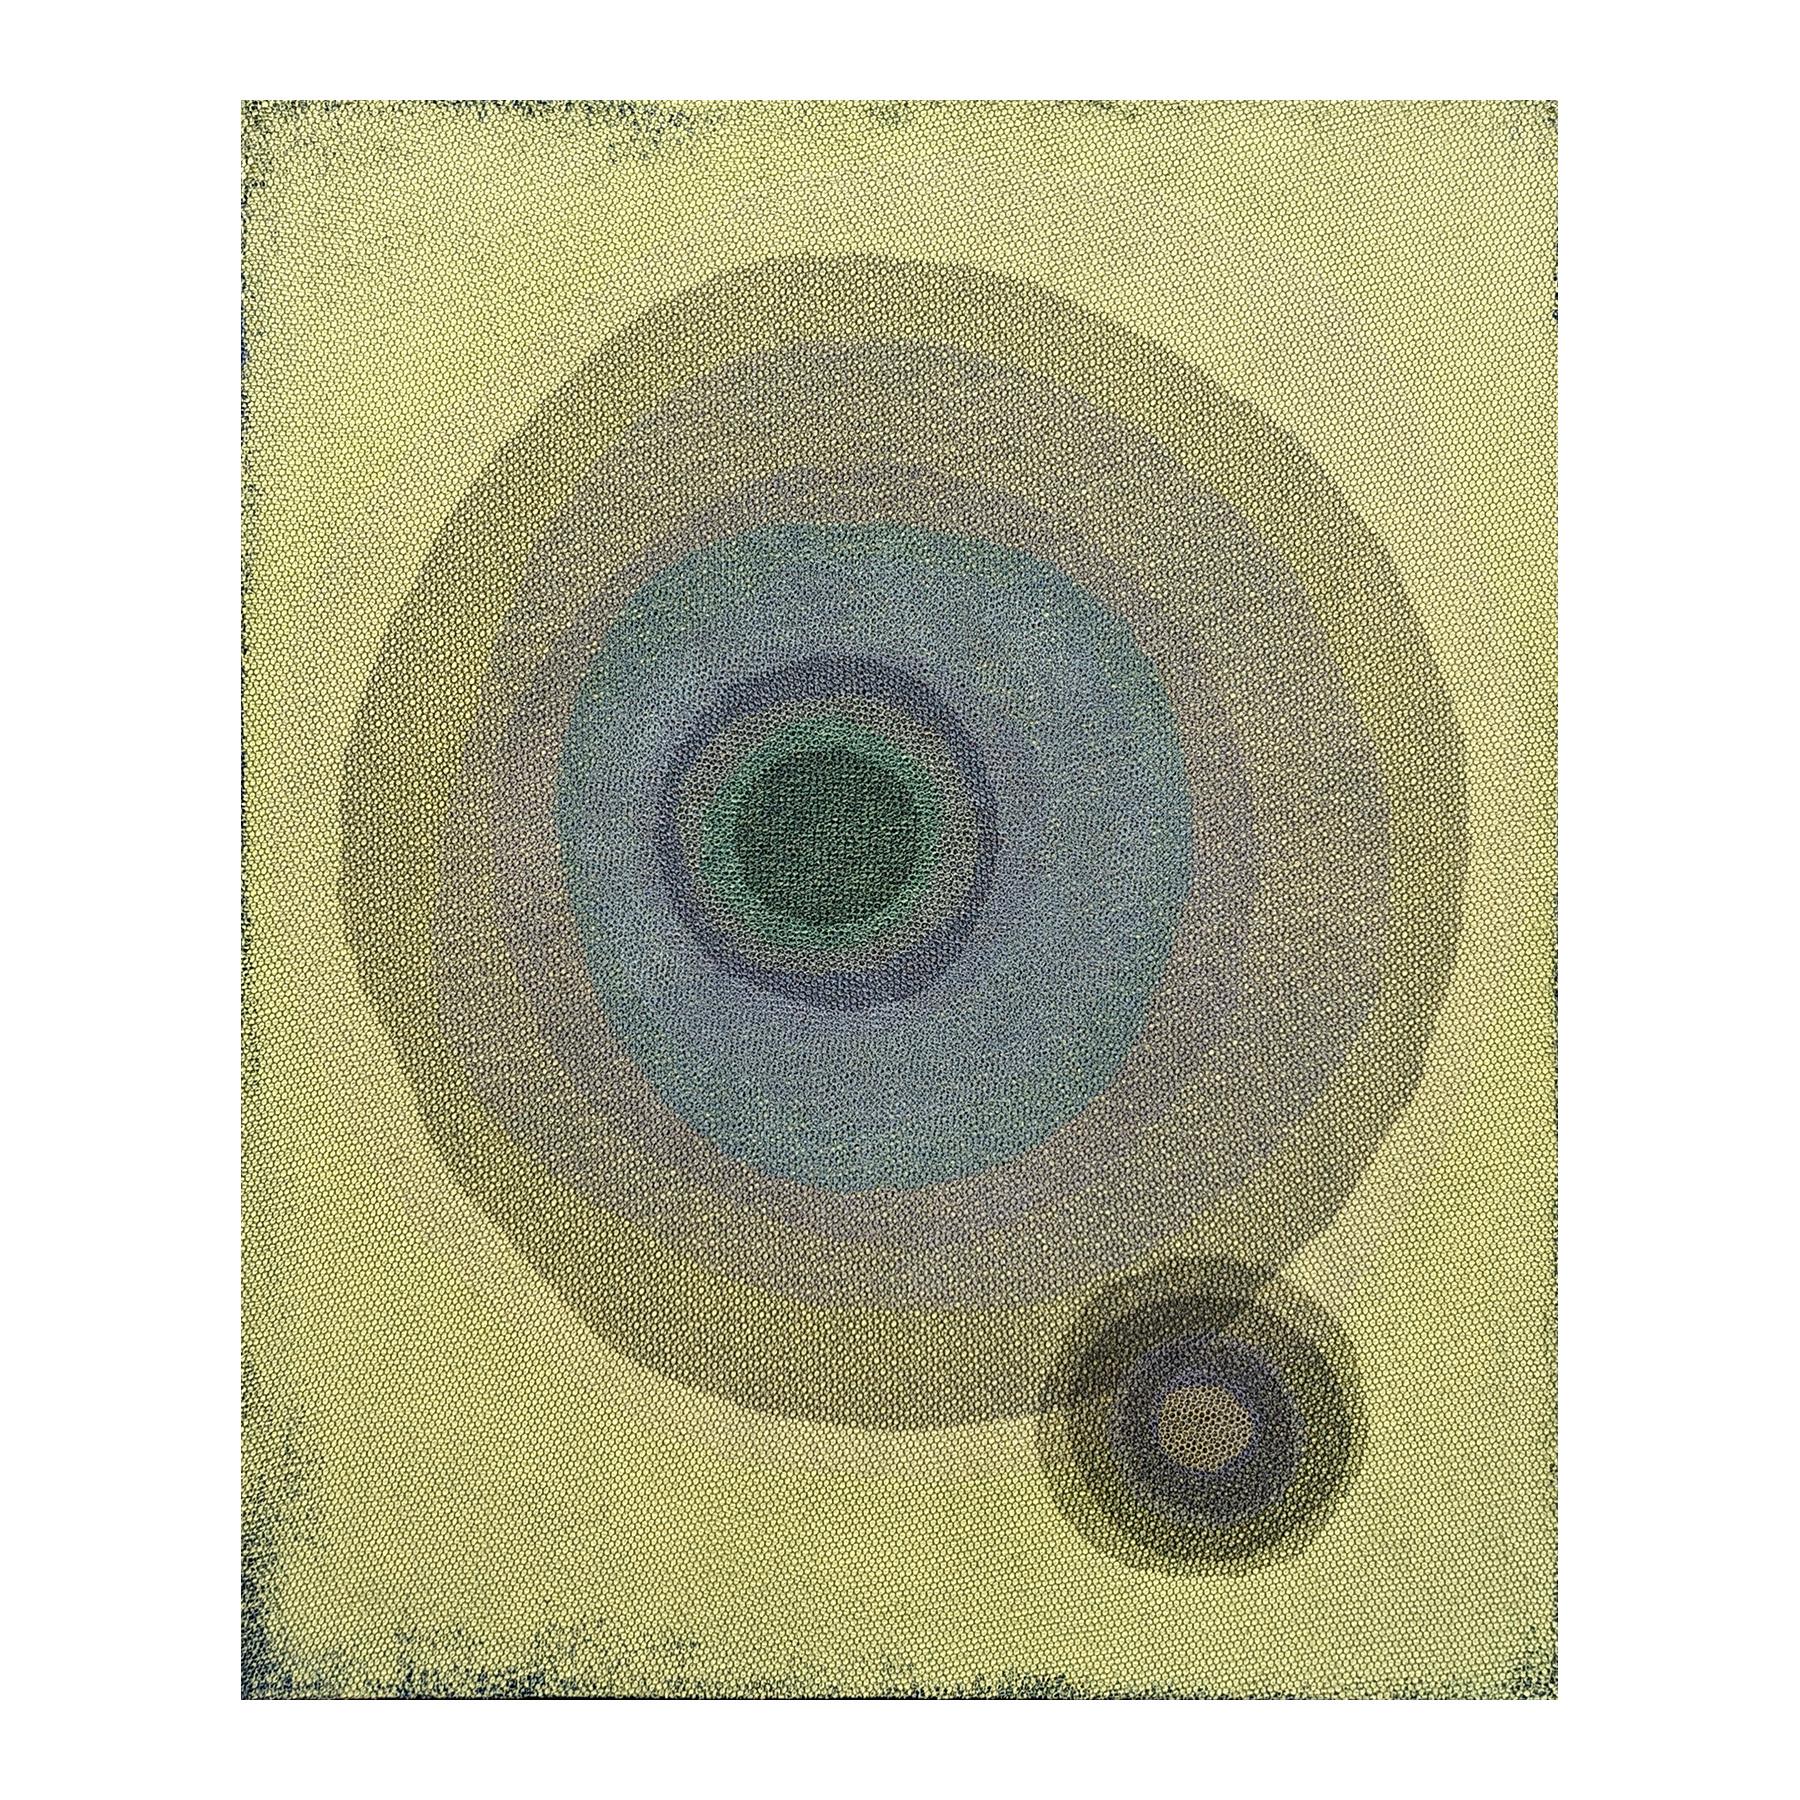 Colorful mixed media abstract painting by contemporary Houston-based artist Orna Feinstein. The work features multiple layers of colorful netting set against a green toned background. Signed, titled, and dated on the reverse. Currently unframed, but